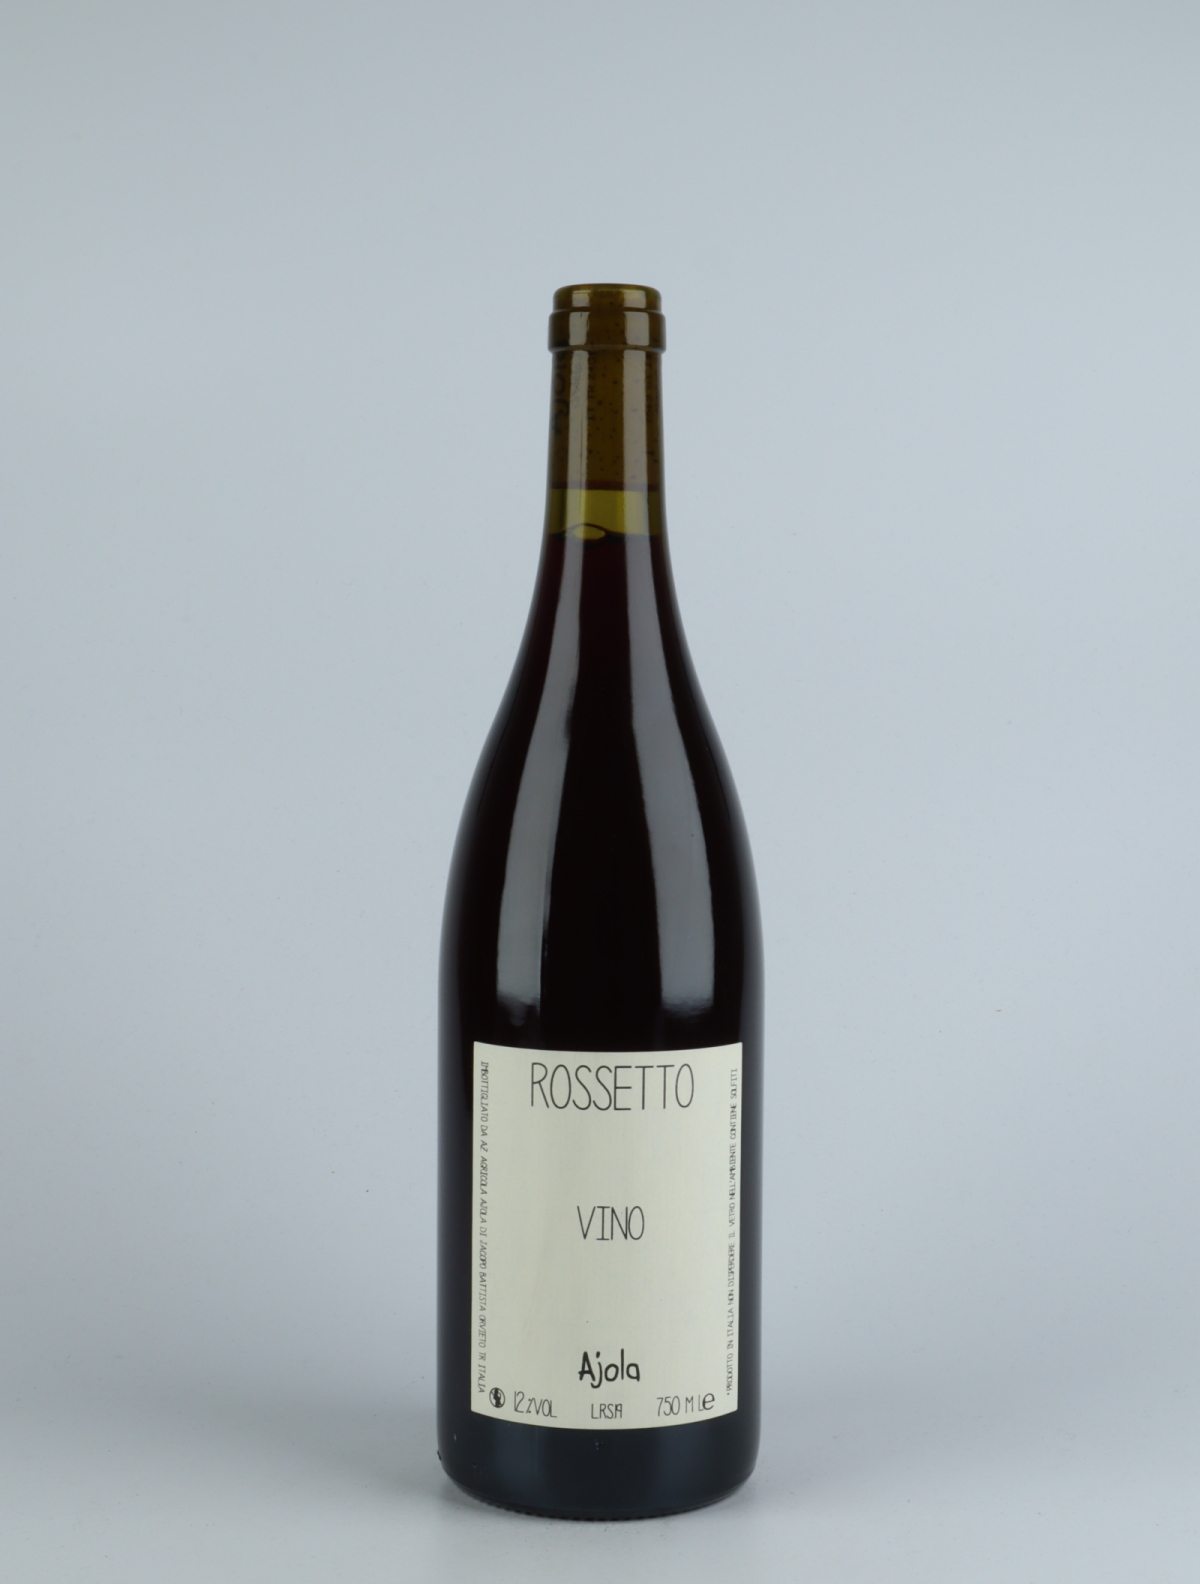 A bottle 2019 Vino Rossetto Red wine from Ajola, Umbria in Italy